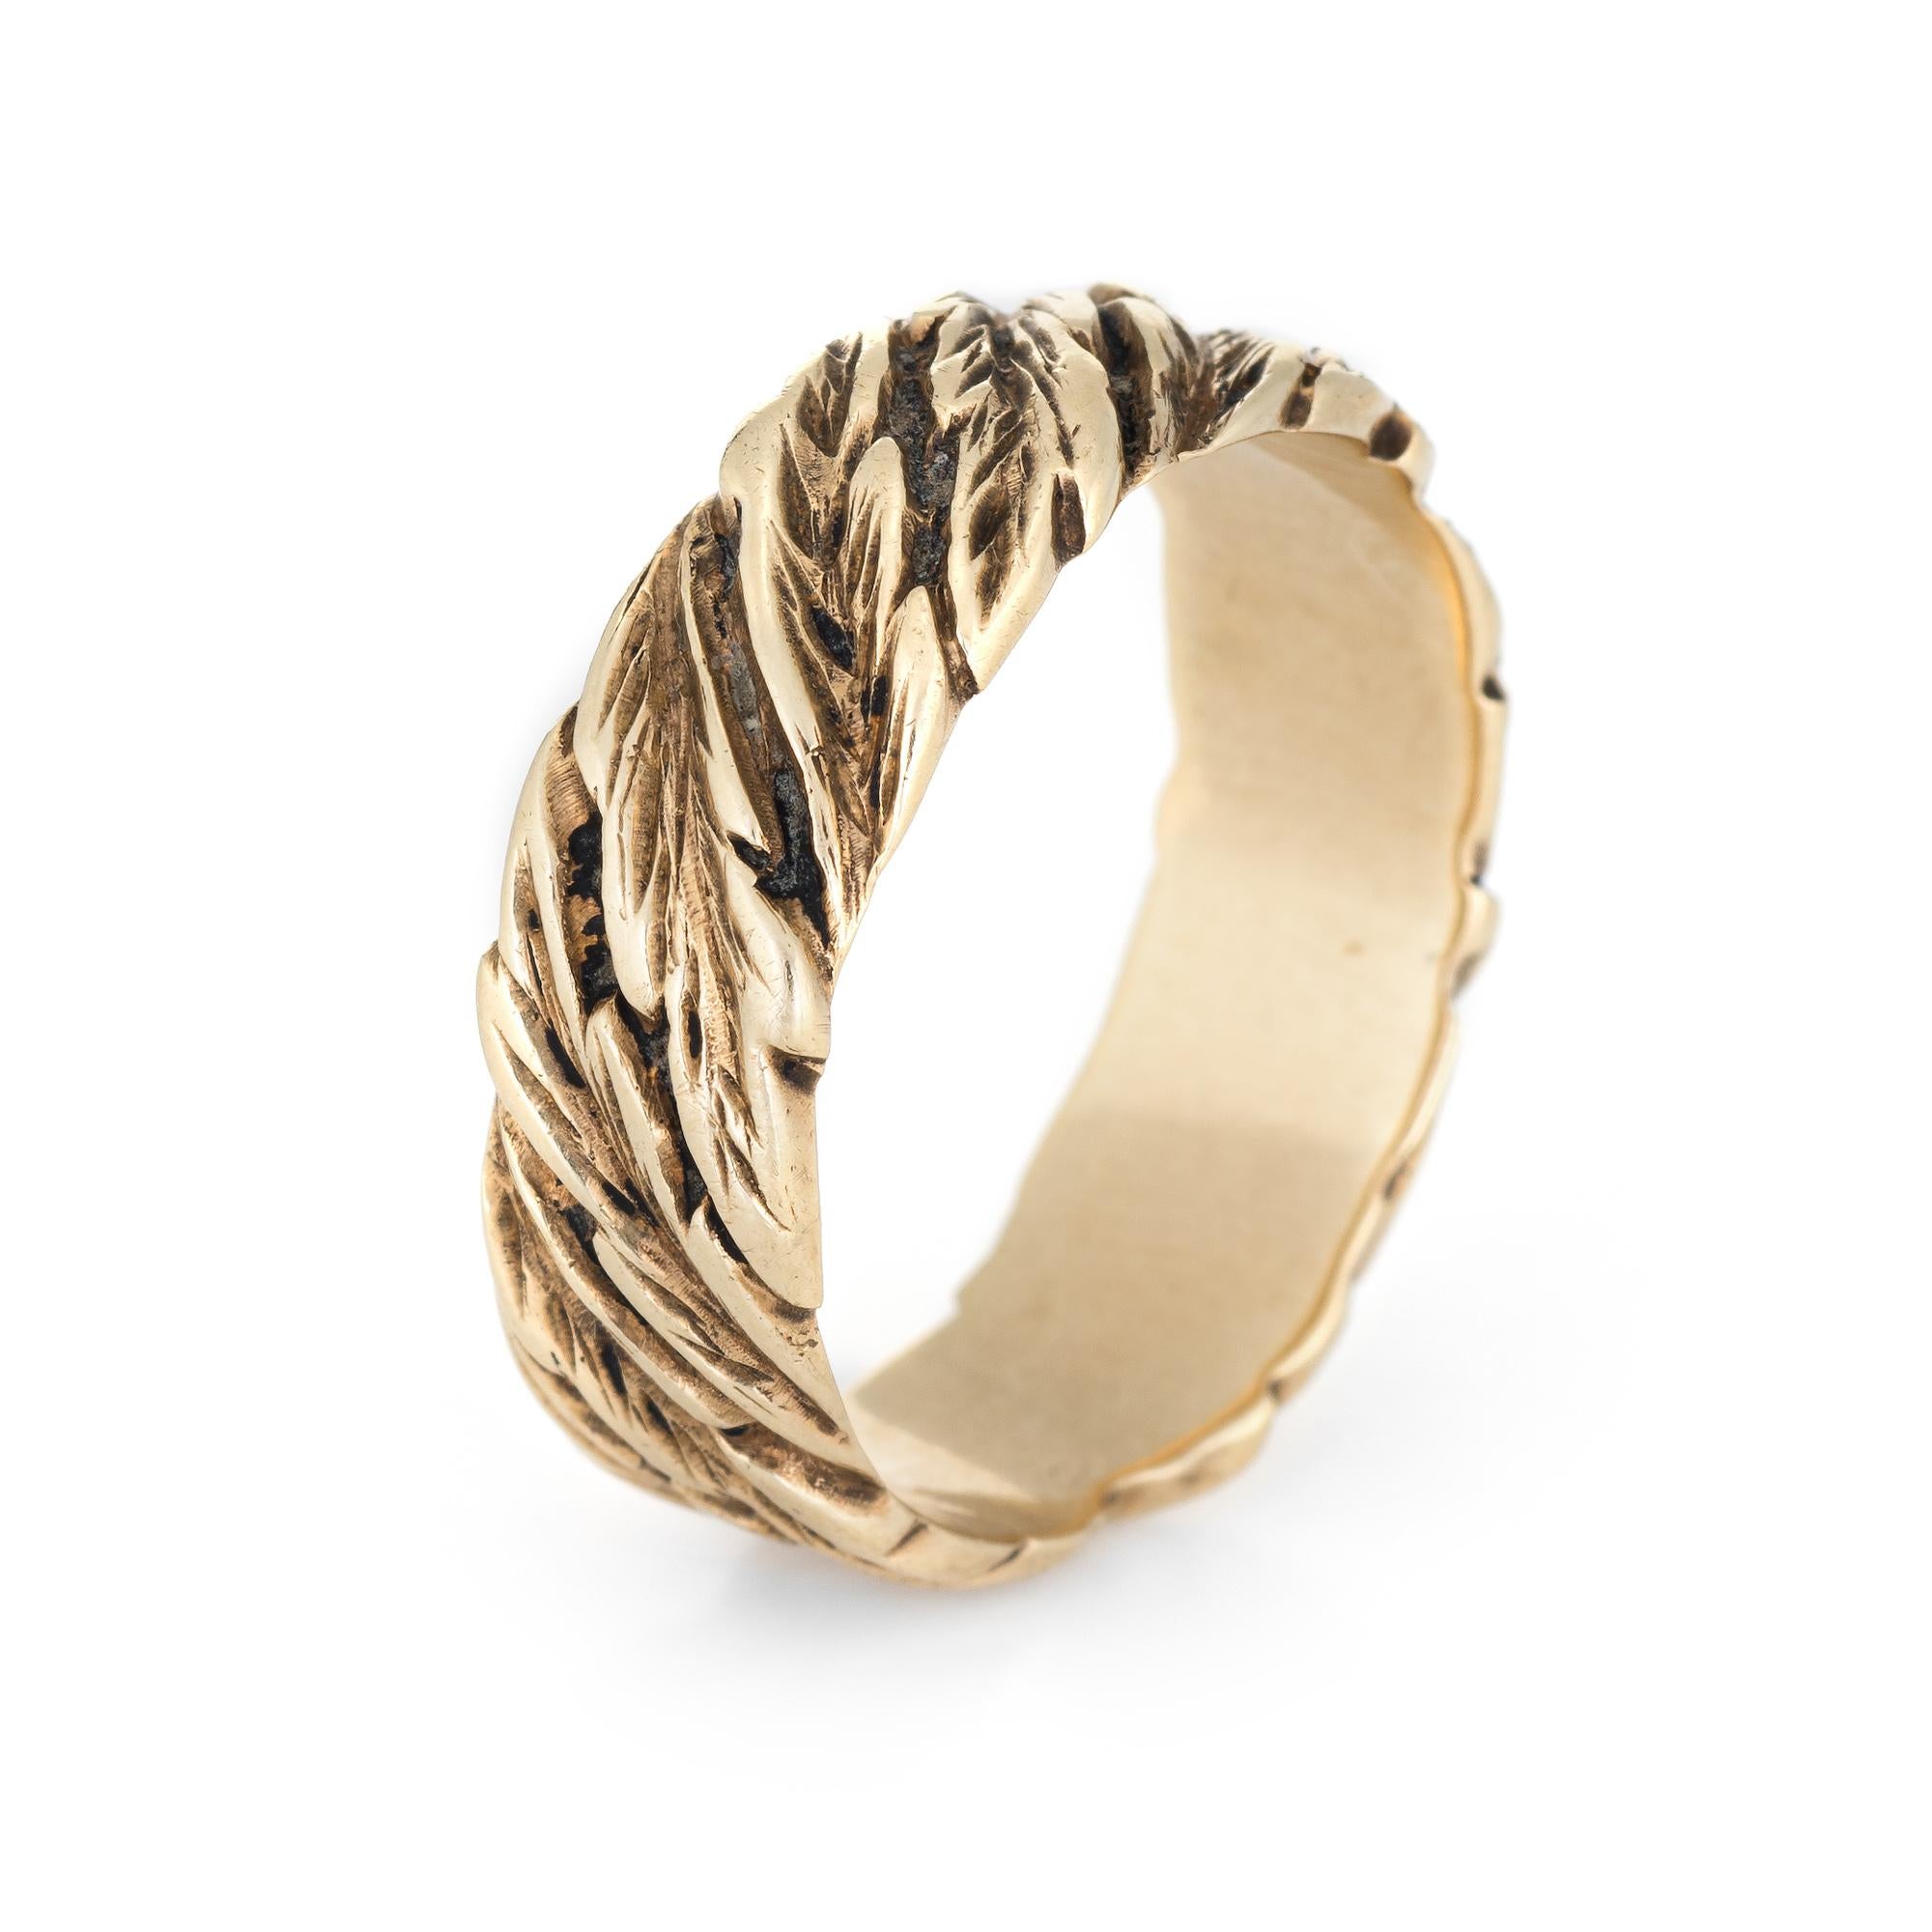 Finely detailed vintage band (circa 1950s to 1960s), crafted in 14 karat yellow gold. 

The ring epitomizes vintage charm and would make a lovely alternative wedding band. The band features a scrolled pattern of leaves that extend around the entire